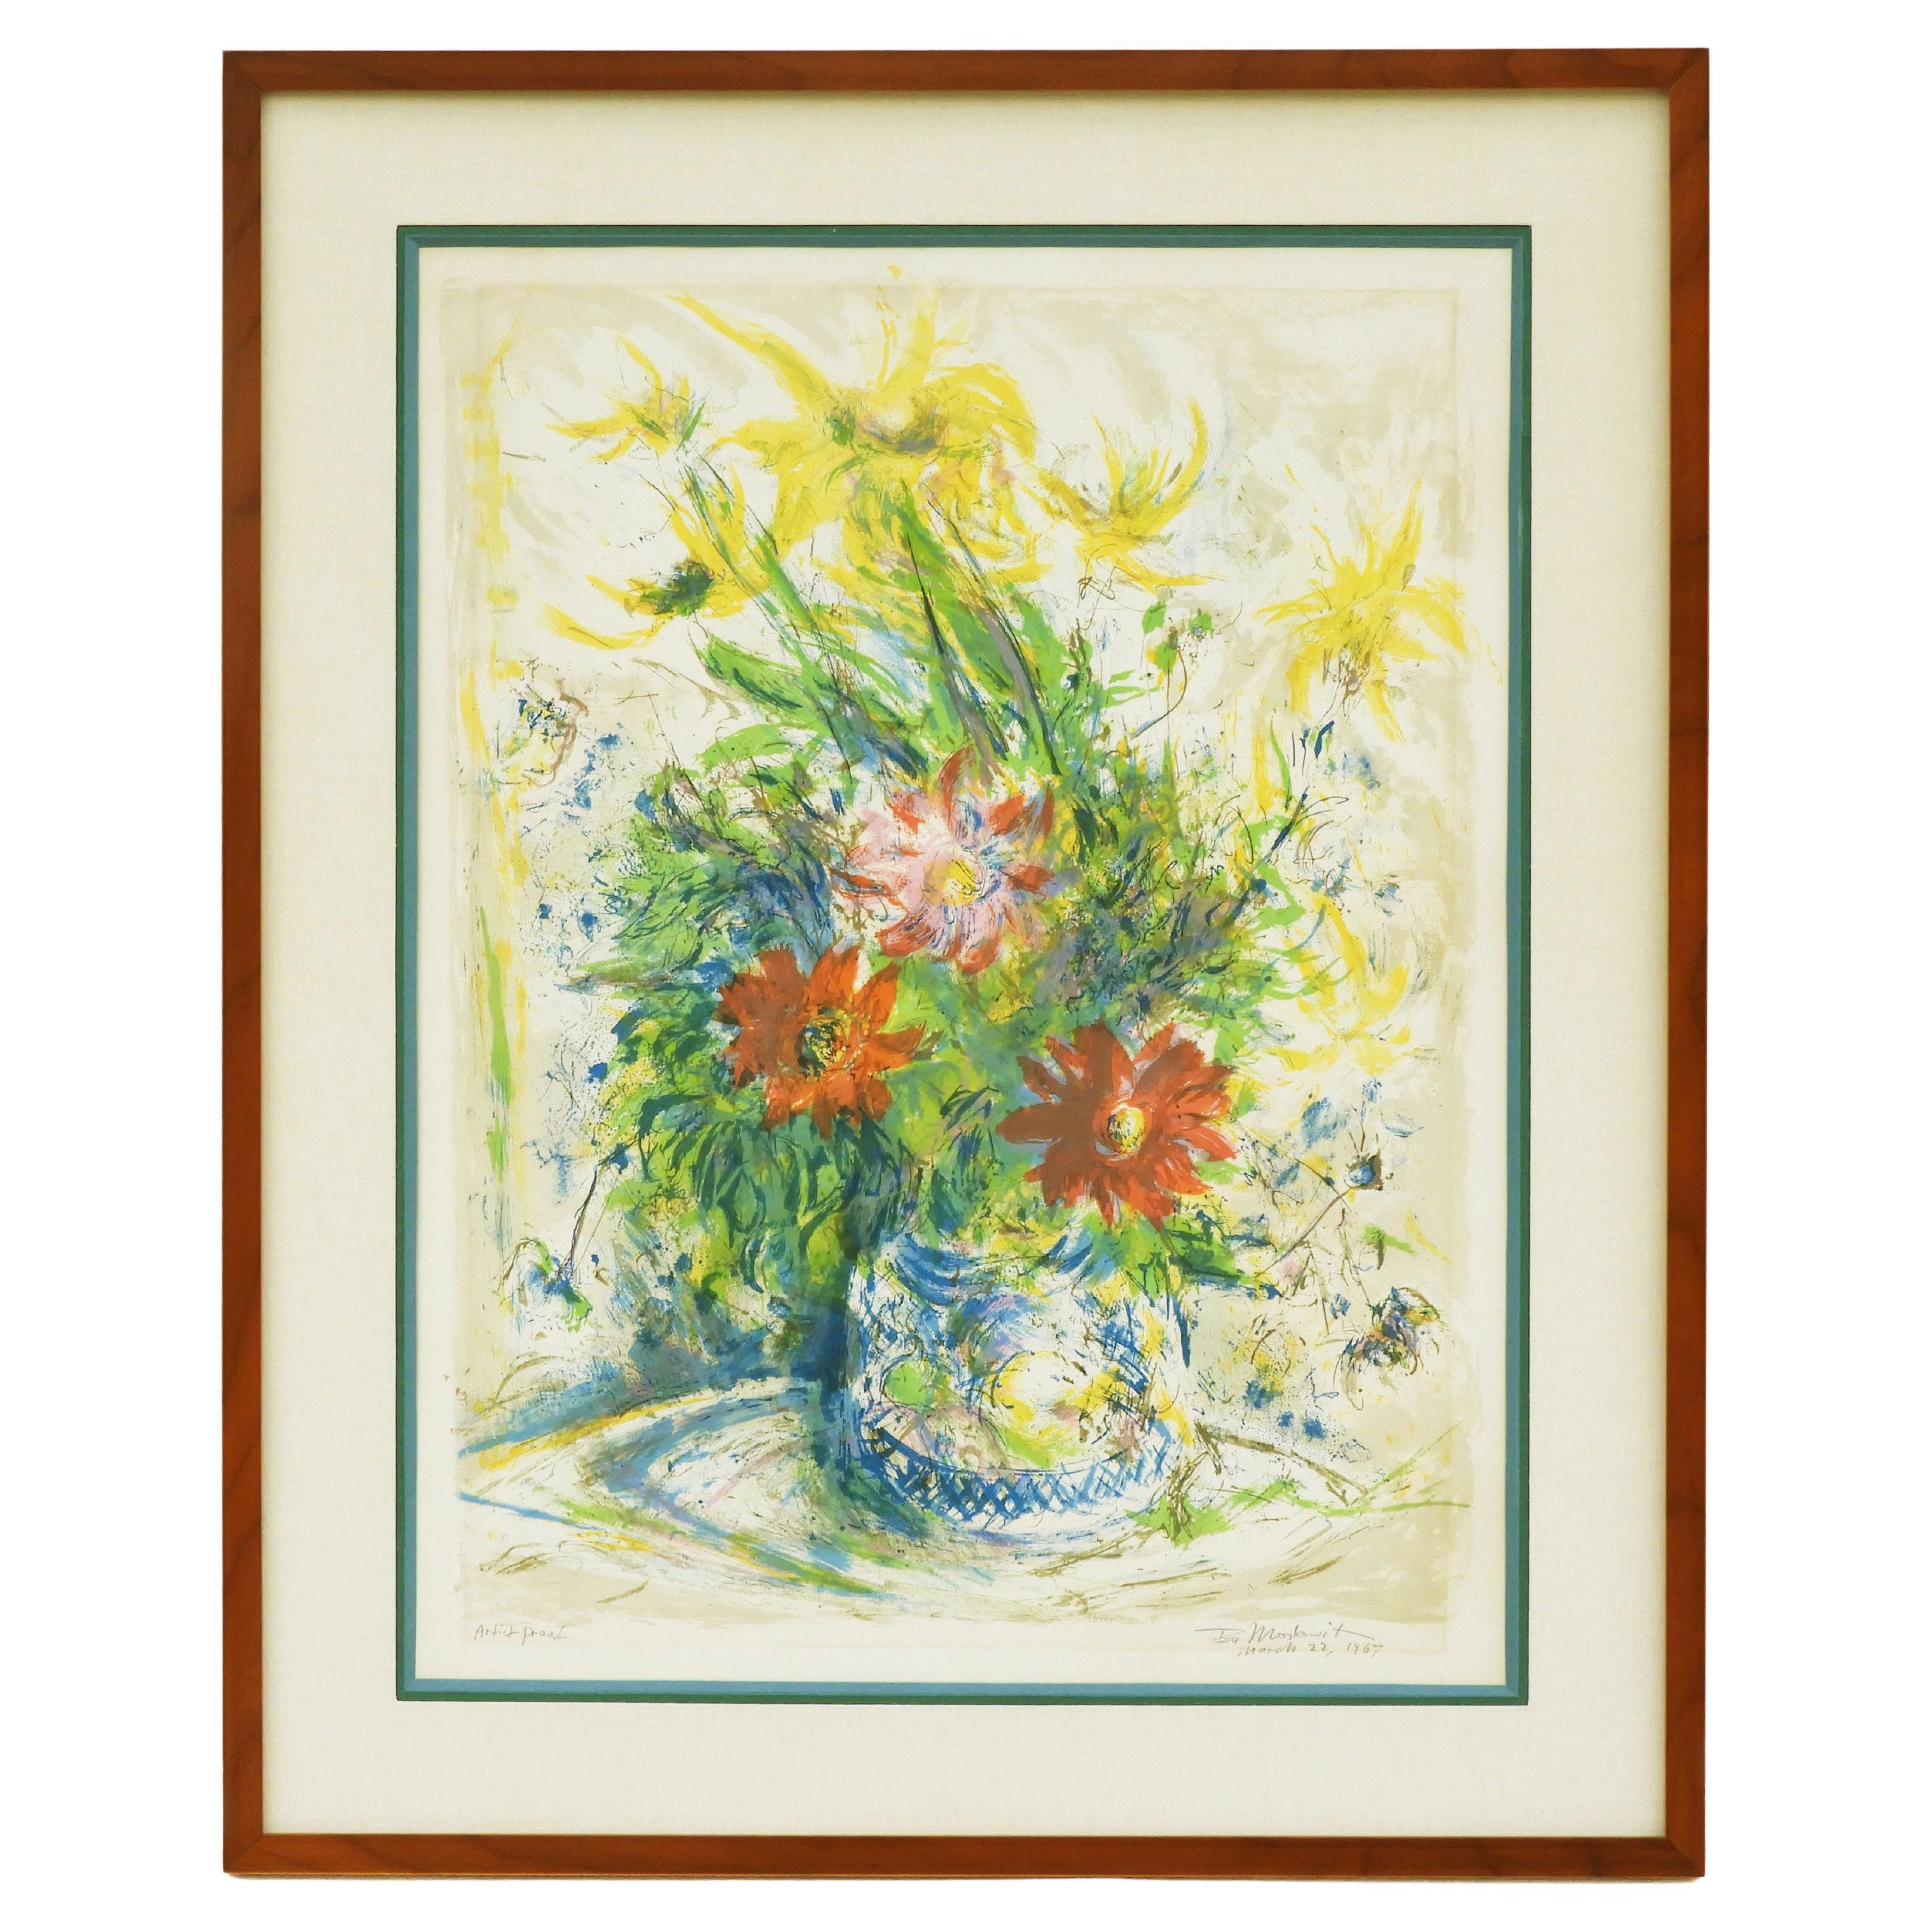 ‘Floral Still Life’ Lithigraph by Ira Moskowitz